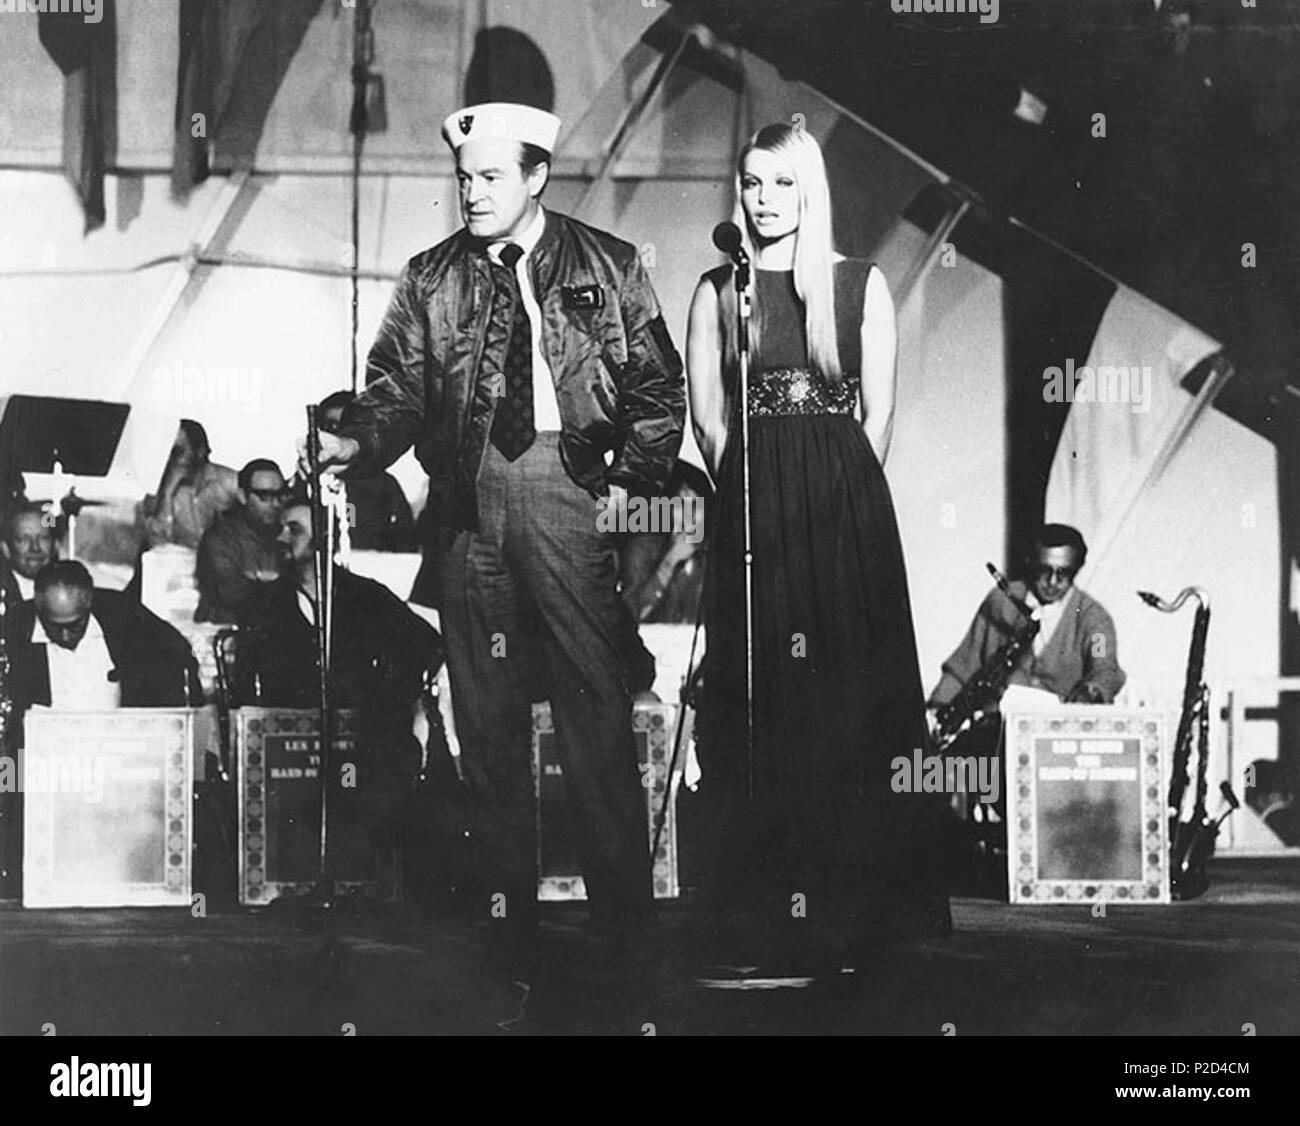 . The entertainer Bob Hope on stage with Miss World 1969, Eva Rueber-Staier, during a Christmas show for servicemen held on board the U.S. Navy aircraft carrier USS Saratoga (CVA-60), off Gaeta, in Formia Bay, Italy, 22 December 1969. The Bob Hope USO Tour performed at 1400 hrs. aboard Saratoga with Eva Rueber-Staier, Hollywood stars Connie Stevens, Suzanne Charny, the 'Golddiggers', Ellen Farley, and Les Brown and his 'Band of Renown'. Over 6.000 Sixth Fleet sailors from Saratoga, USS Little Rock (CLG-4), five destroyers and a fleet oiler attended the event held in the carrier's hanger bay. 2 Stock Photo